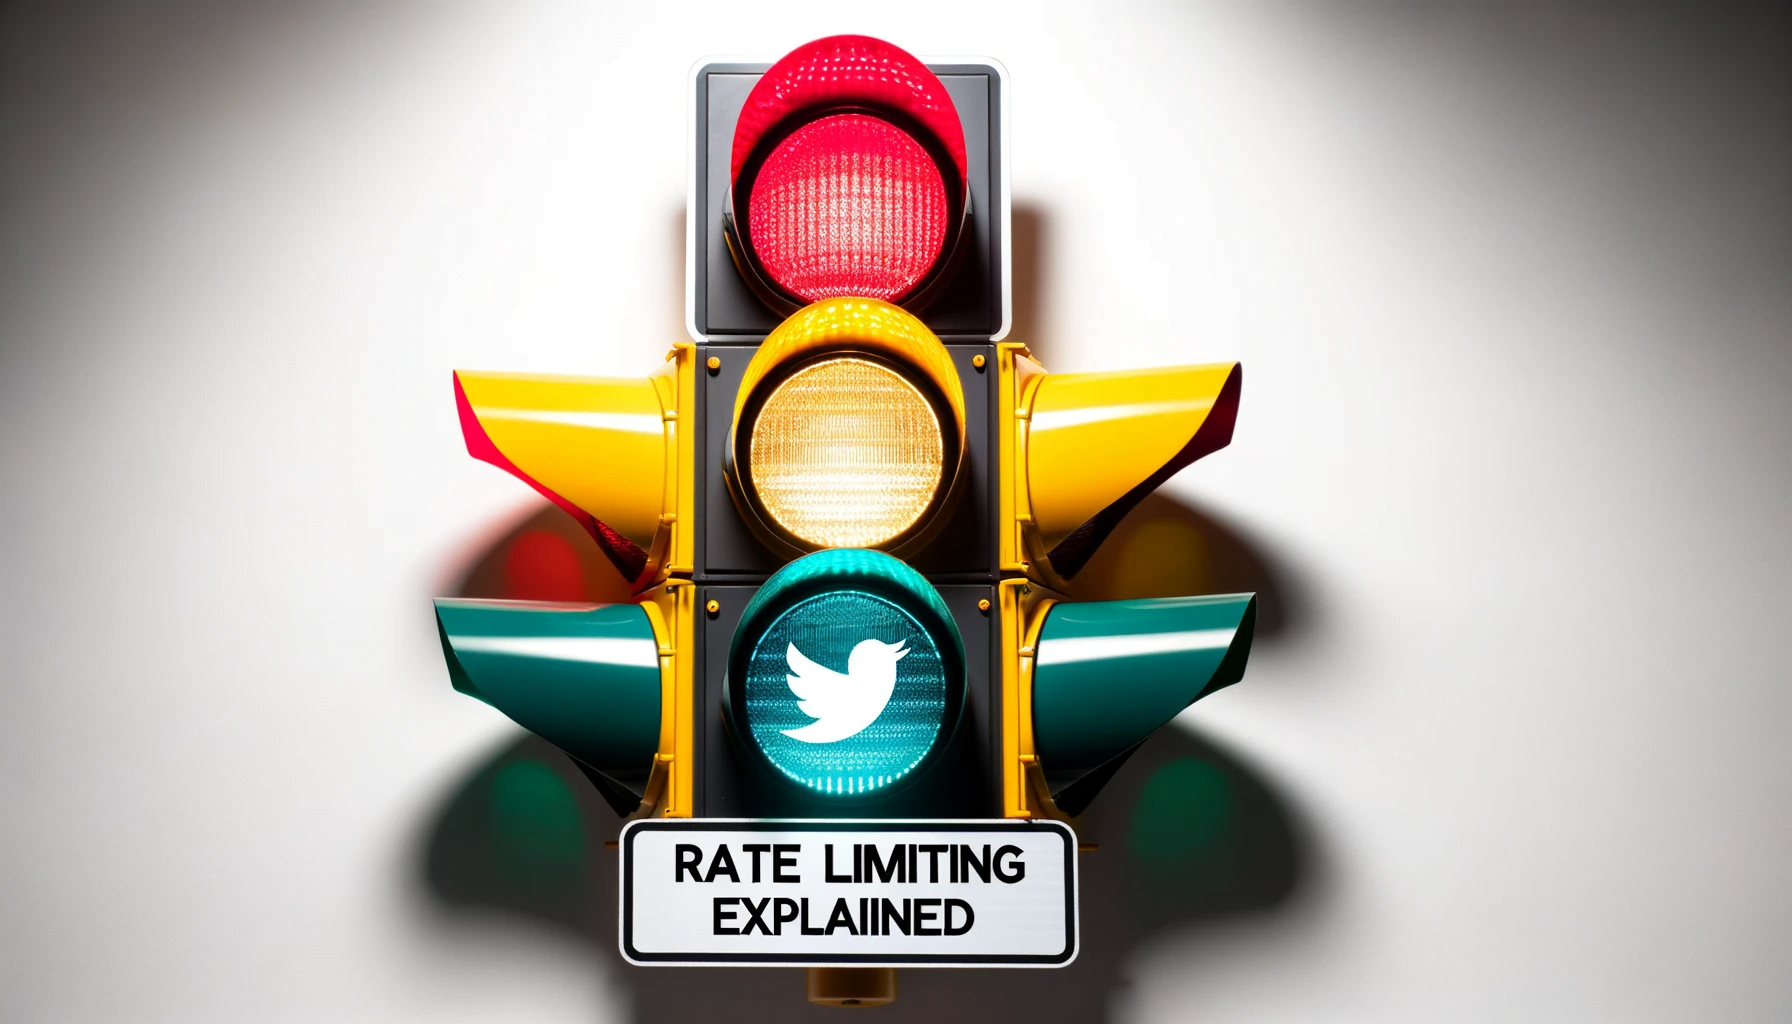 "You have been rate limited. Please wait a few moments and try again" – Twitter's Rate Limiting Explained